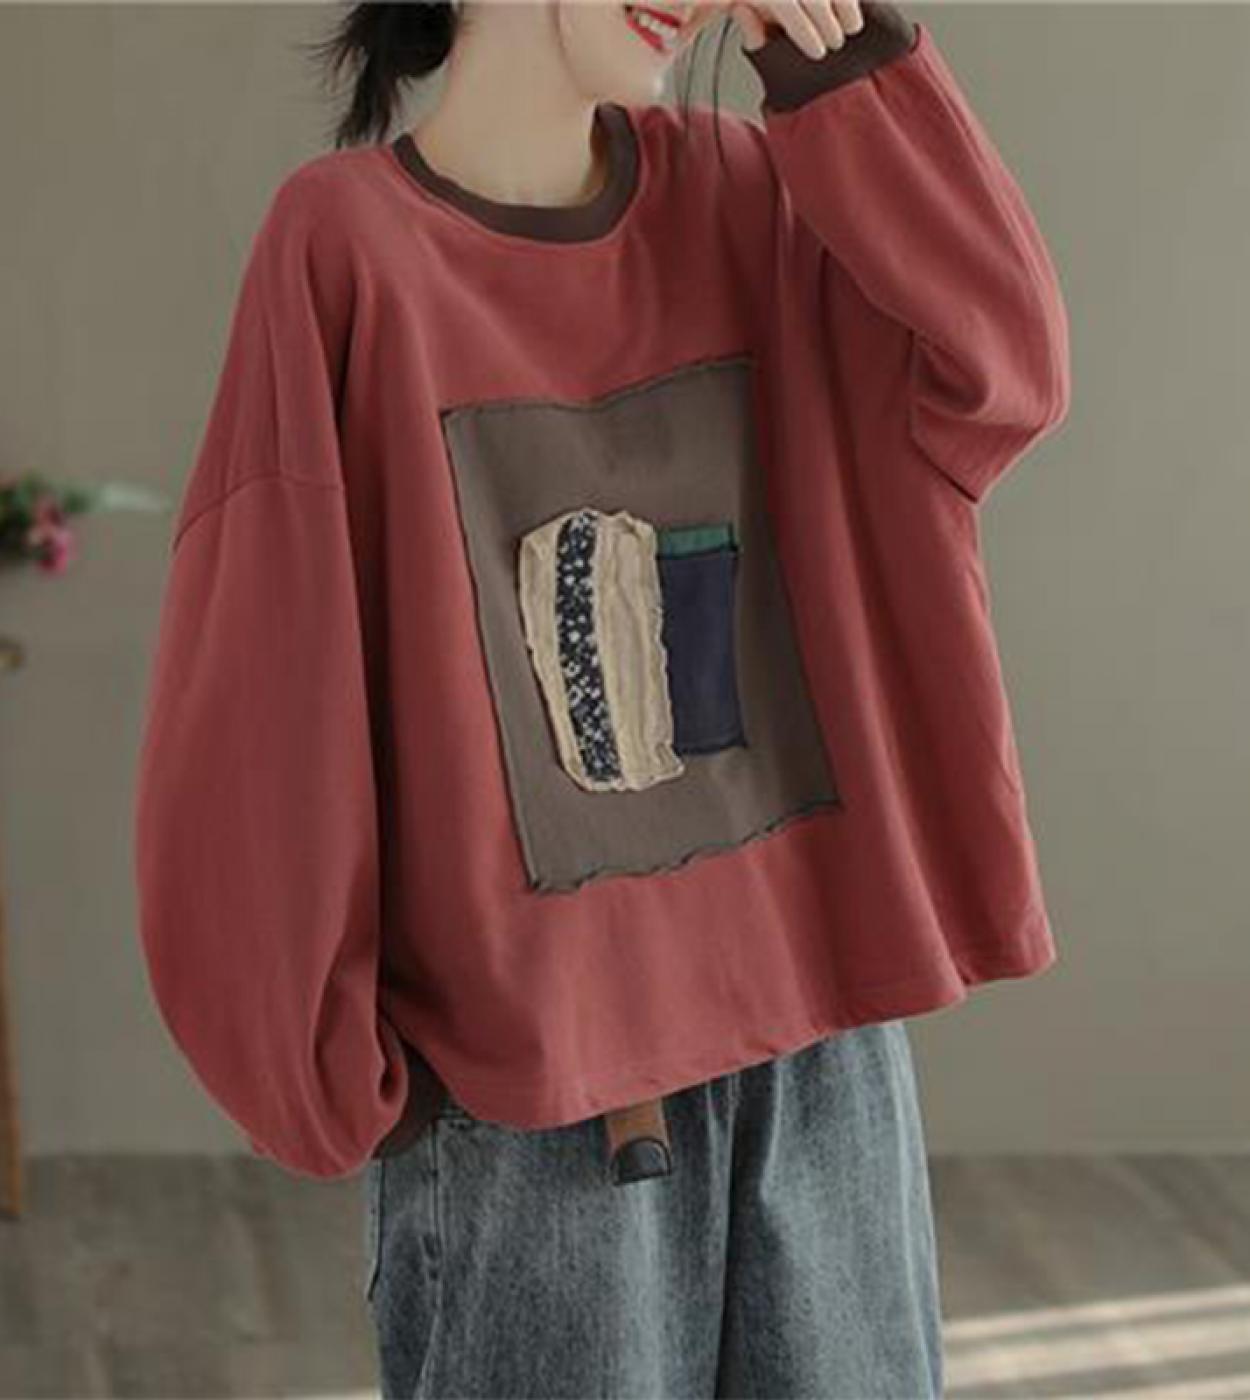 2022 Spring New Arts Style Women Long Sleeve Loose Tee Shirt Femme Tops 100 Cotton Patchwork Design Casual O Neck T Shi